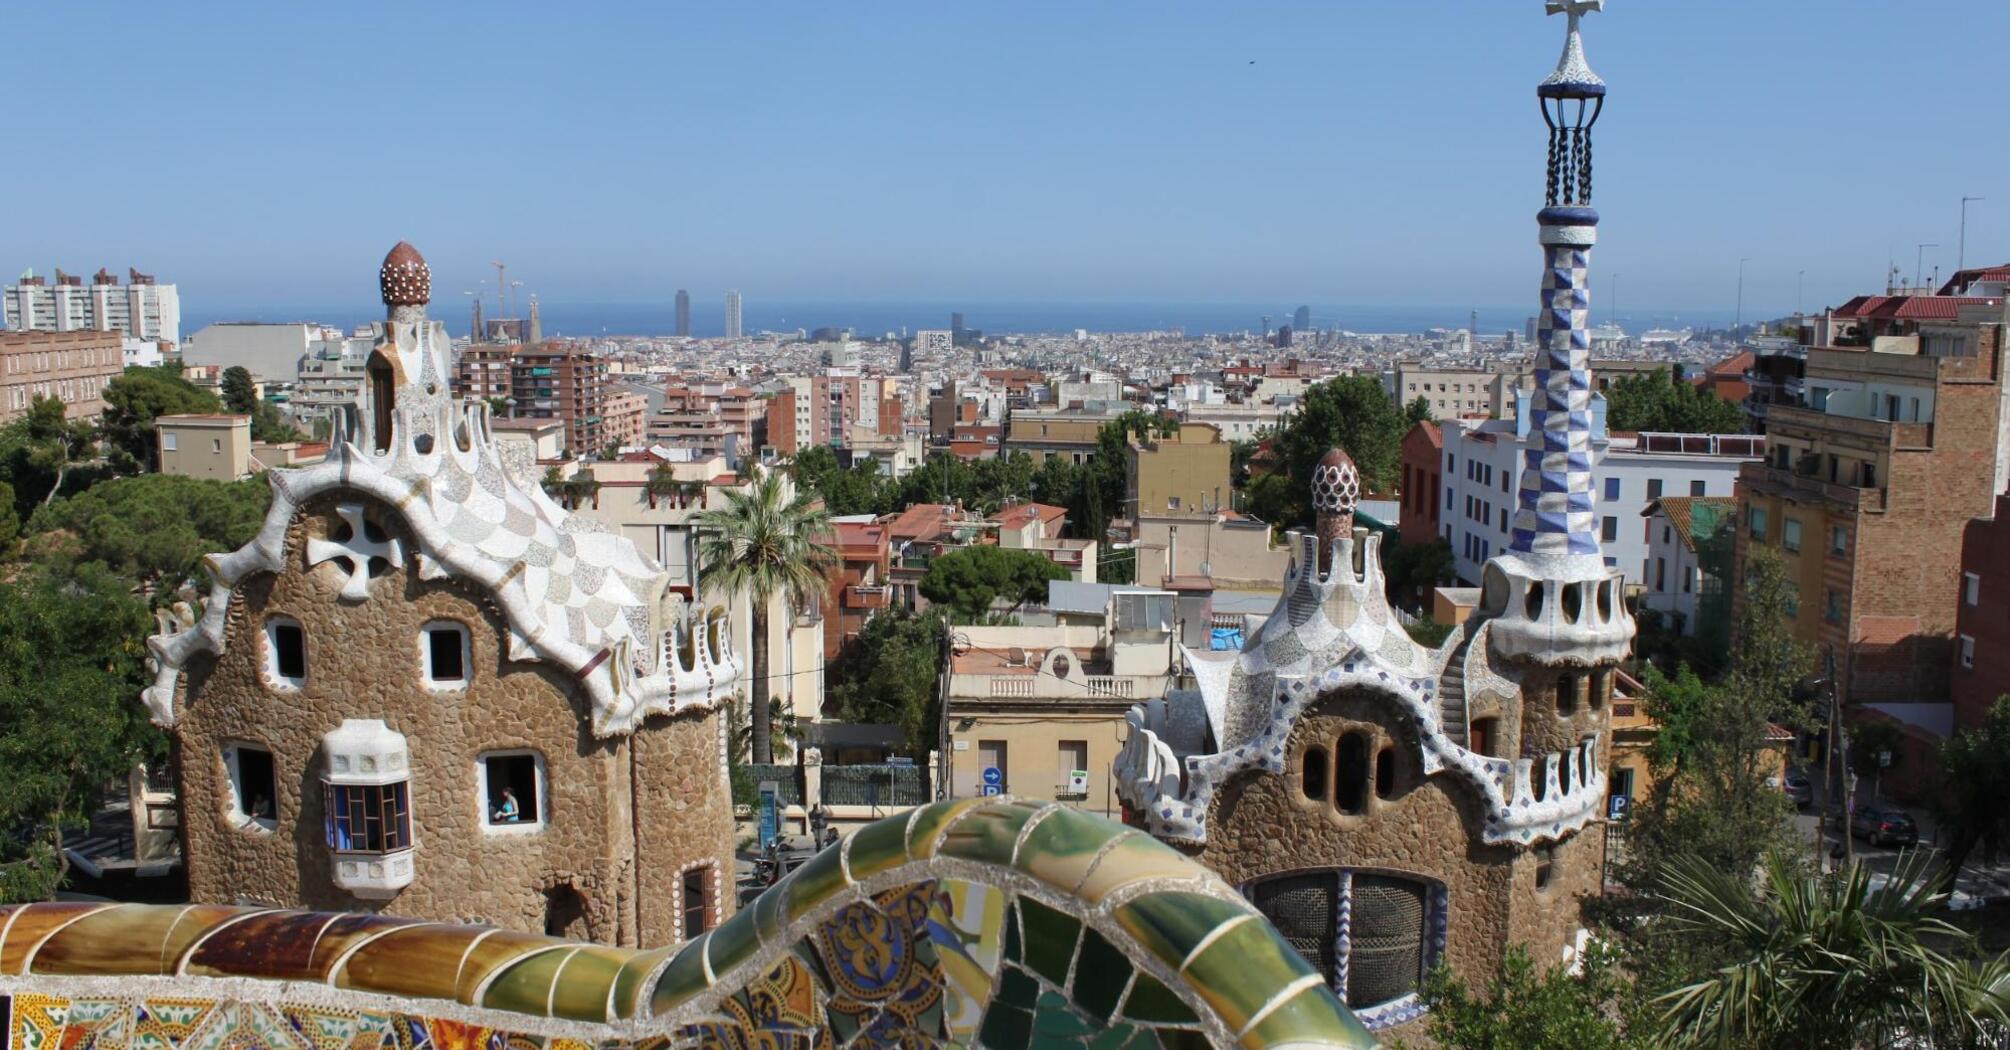 A view of Barcelona from Park Güell, one of Antoni Gaudí's most famous creations